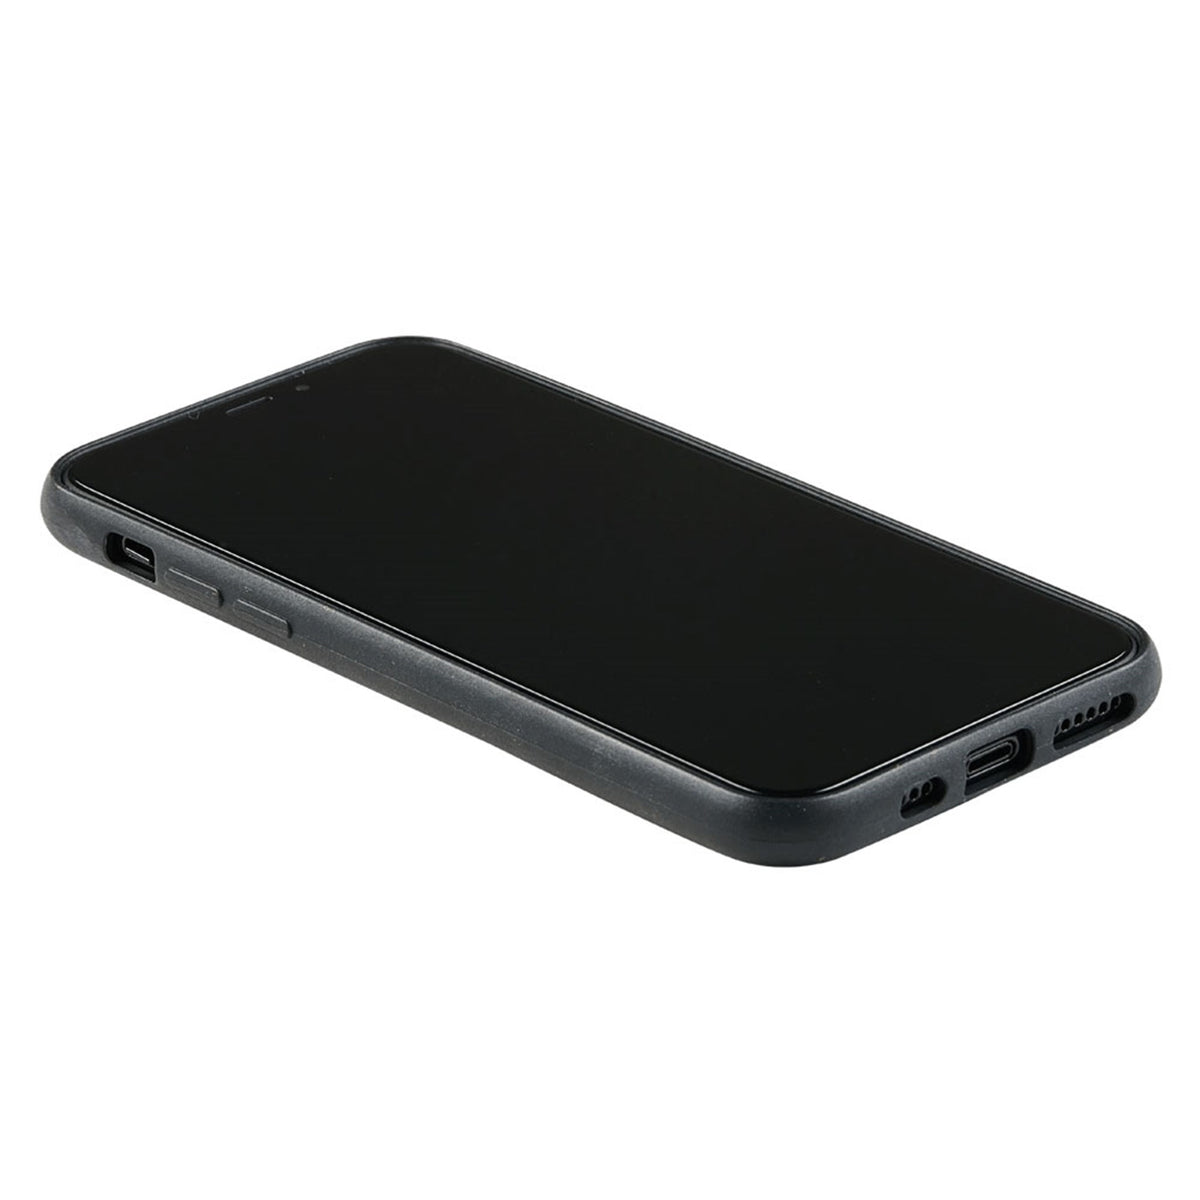 GreyLime-iPhone-11-Pro-Max-biodegradable-cover-Black-COIP11PM01-V3.jpg